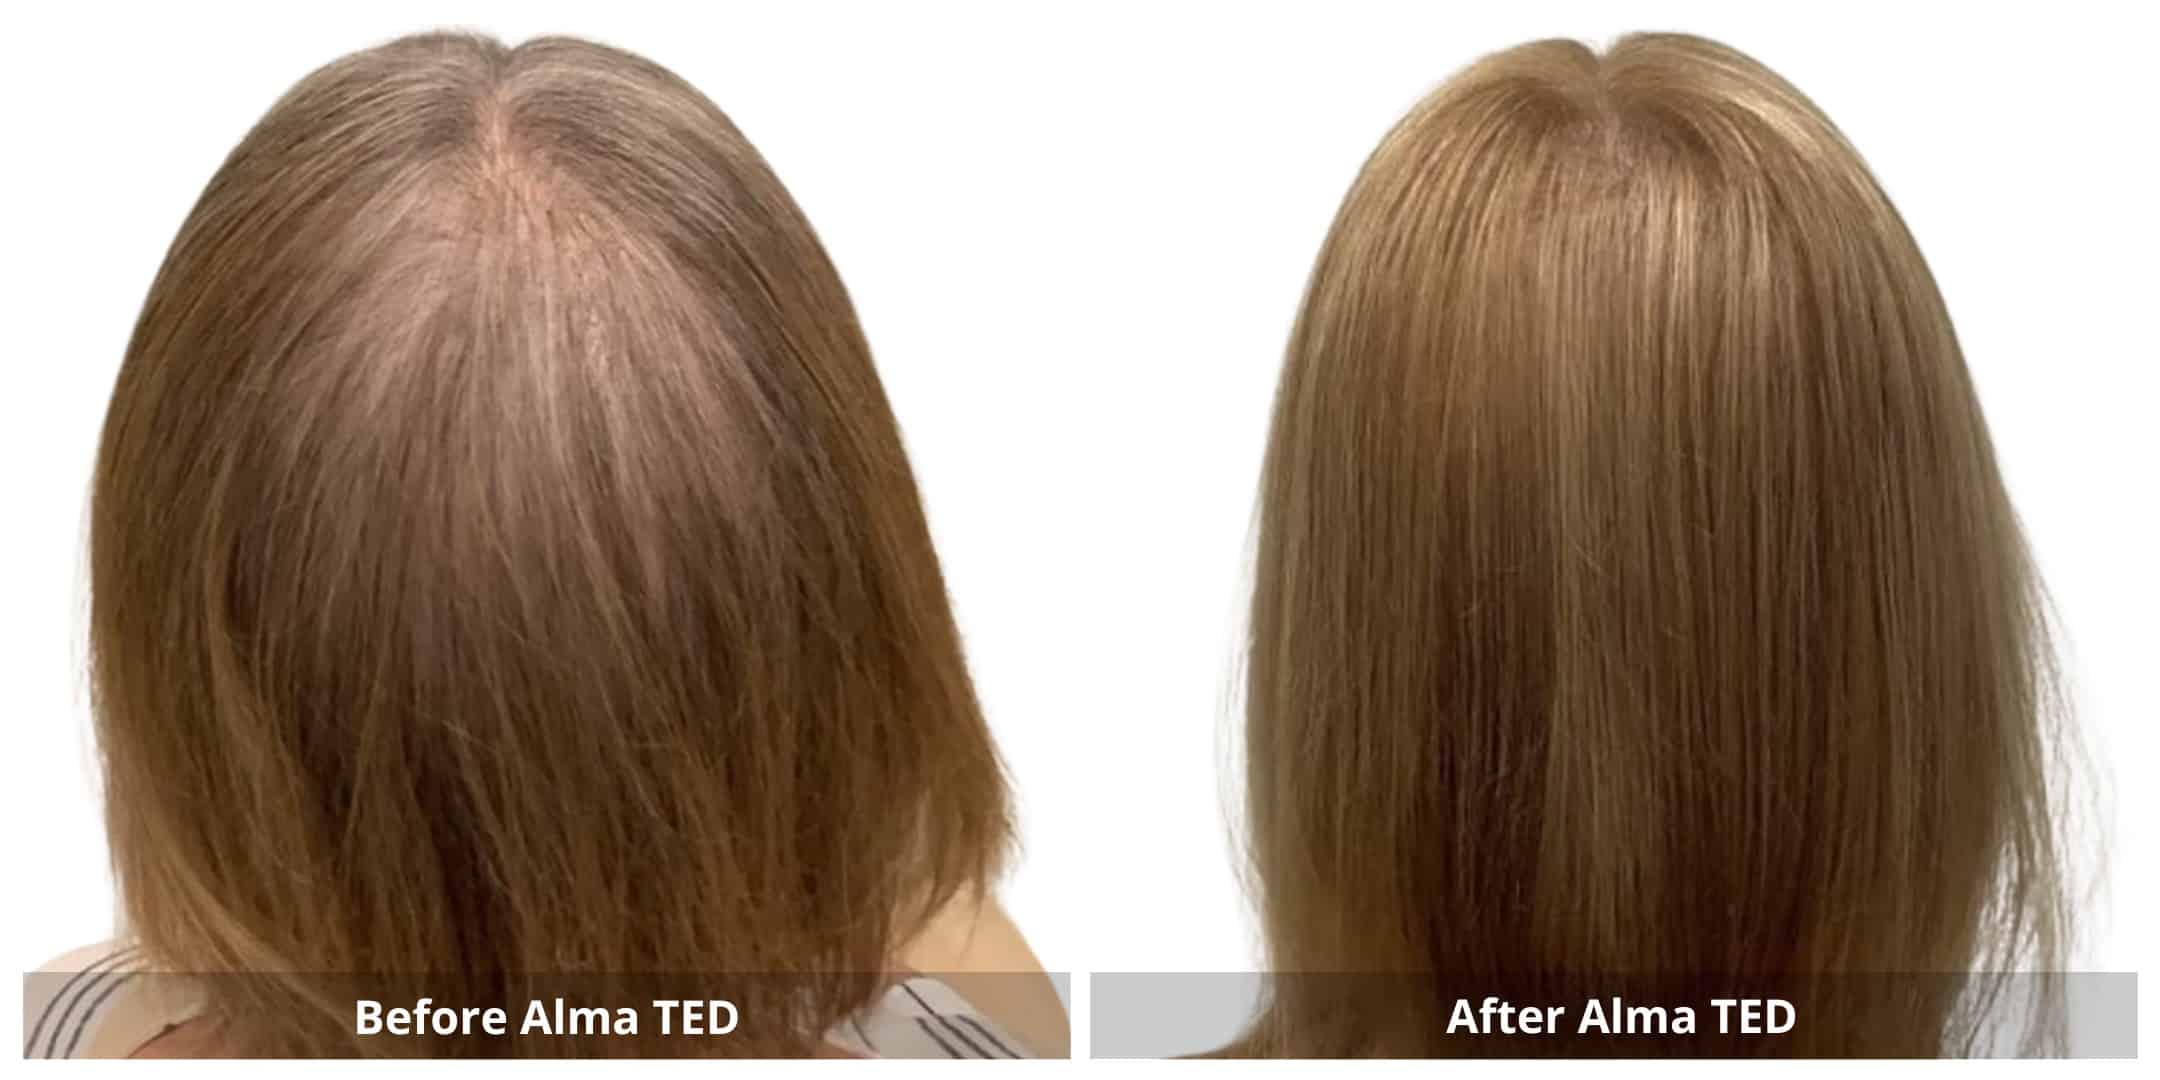 Alma ted hair restoration before and after photo 2